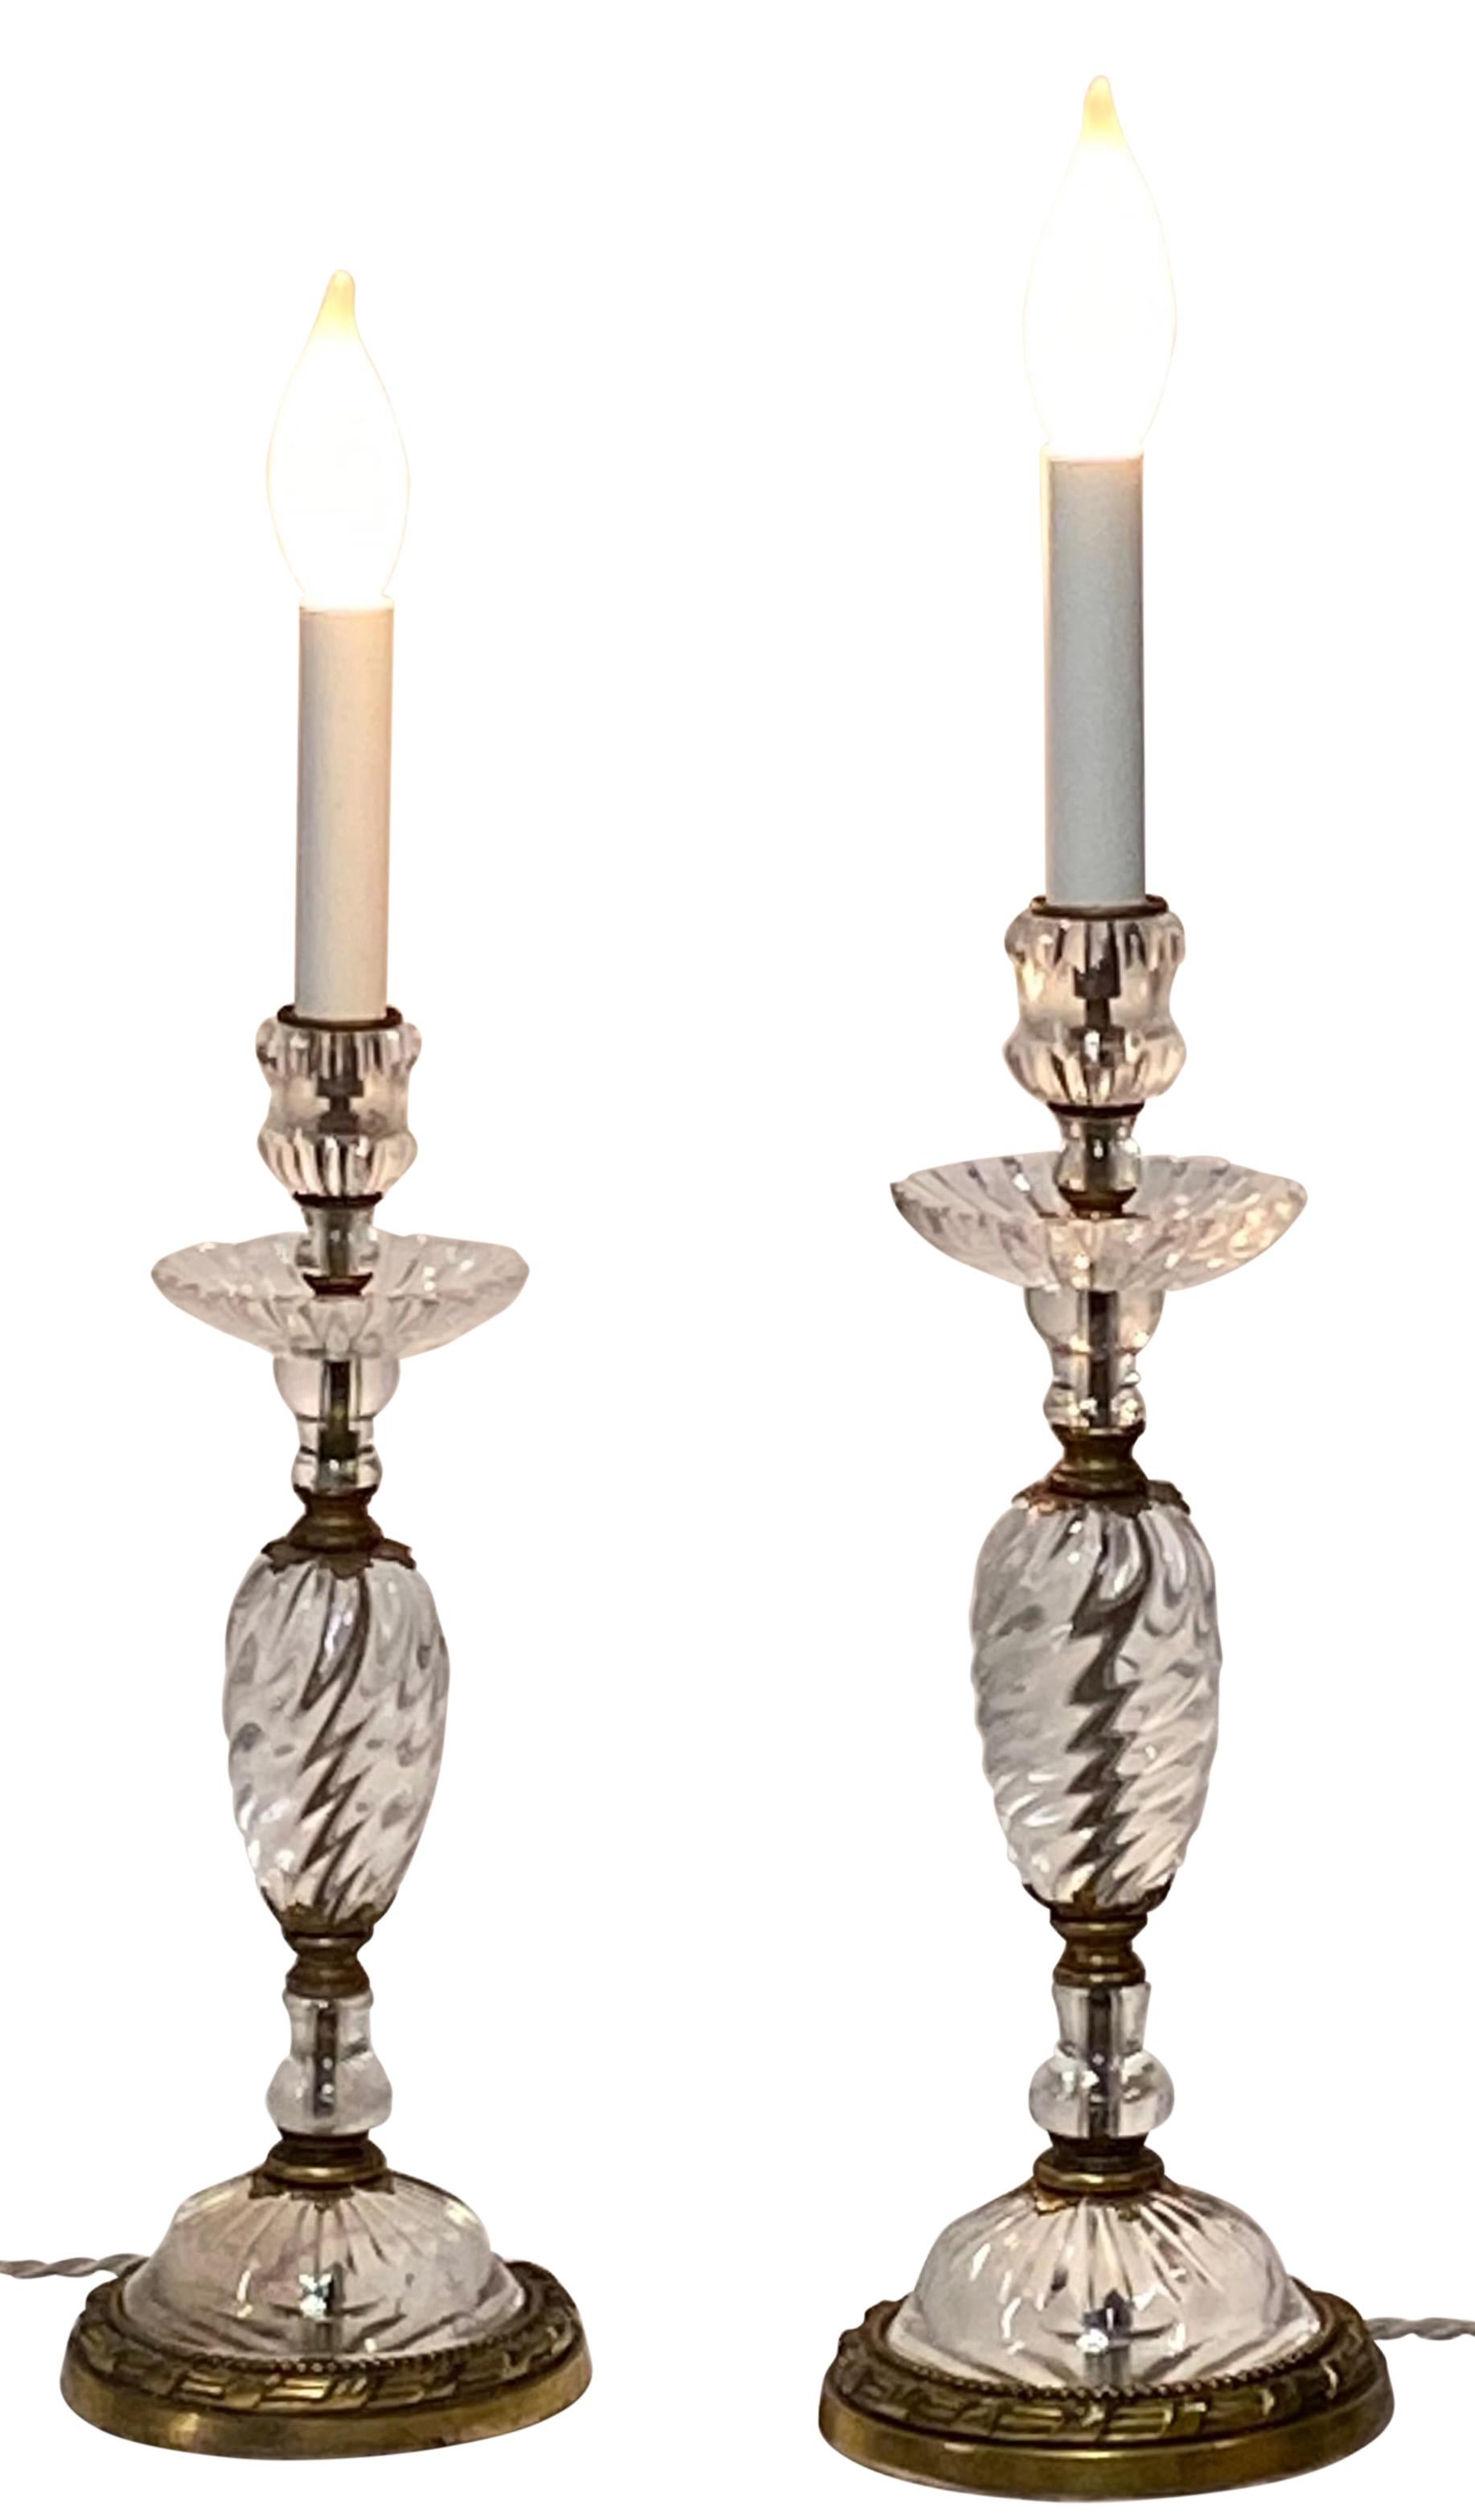 Pair of Early 19th Century French Rock Crystal Candle Stick Boudoir Lamps For Sale 3